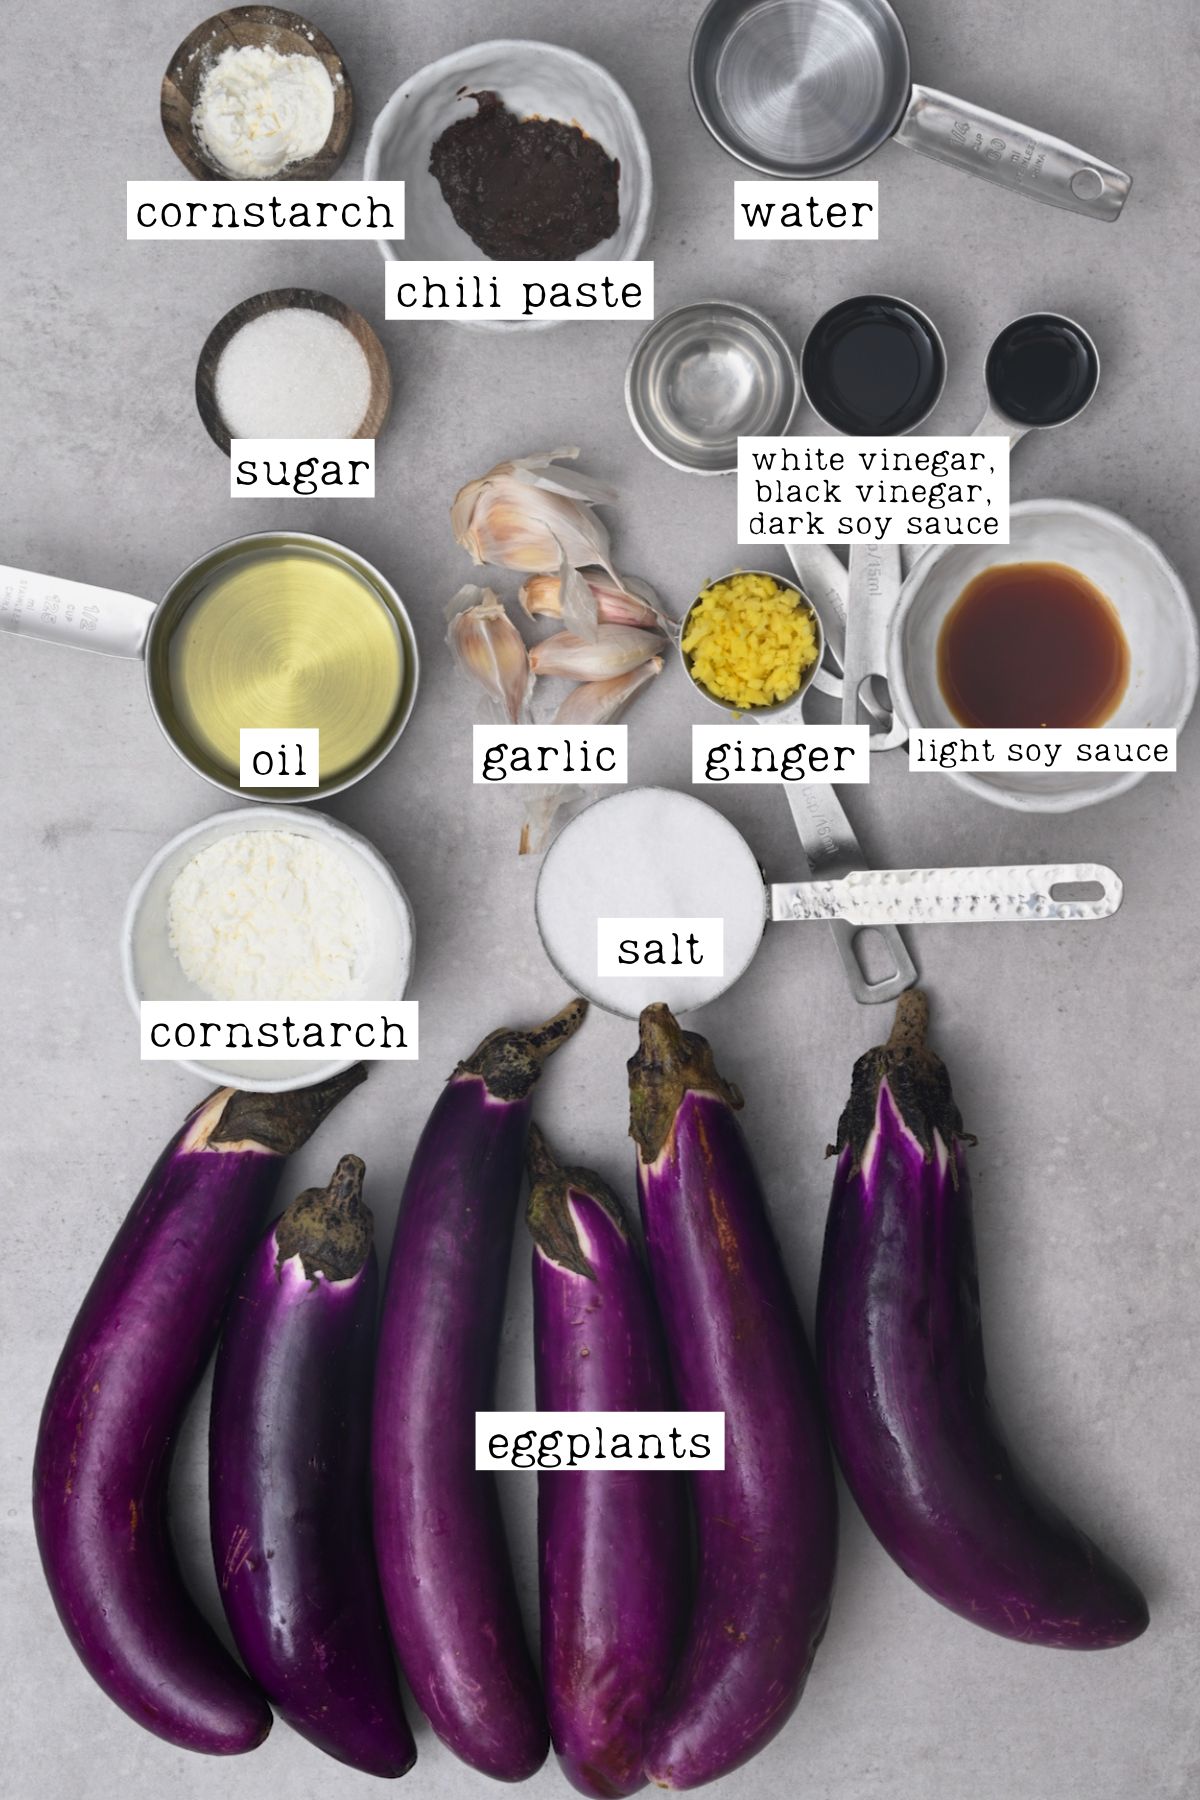 Ingredients for Chinese eggplant